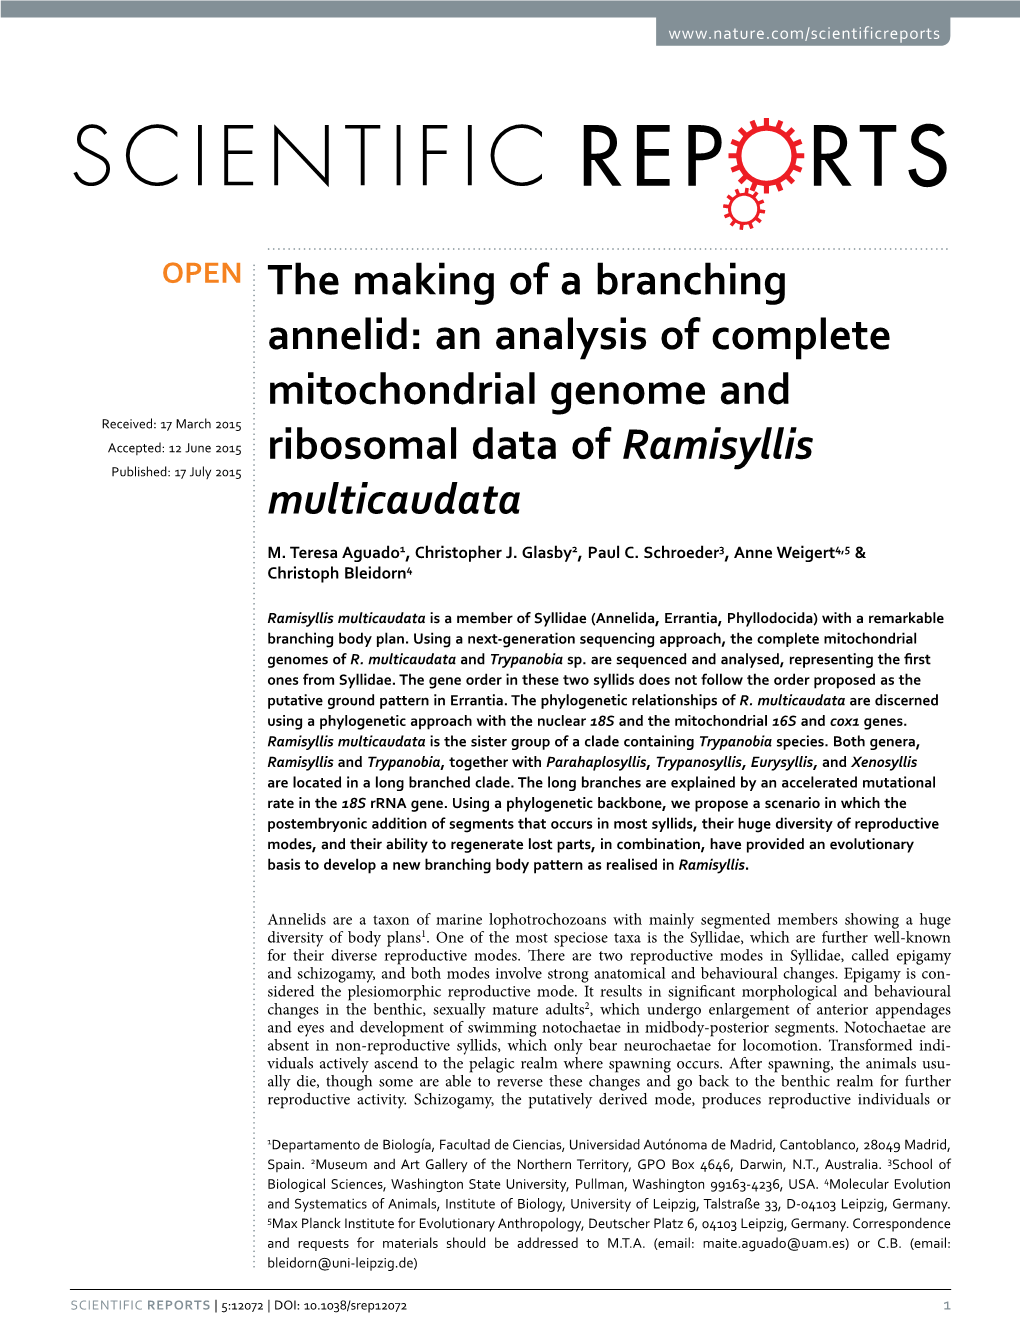 An Analysis of Complete Mitochondrial Genome and Received: 17 March 2015 Accepted: 12 June 2015 Ribosomal Data of Ramisyllis Published: 17 July 2015 Multicaudata